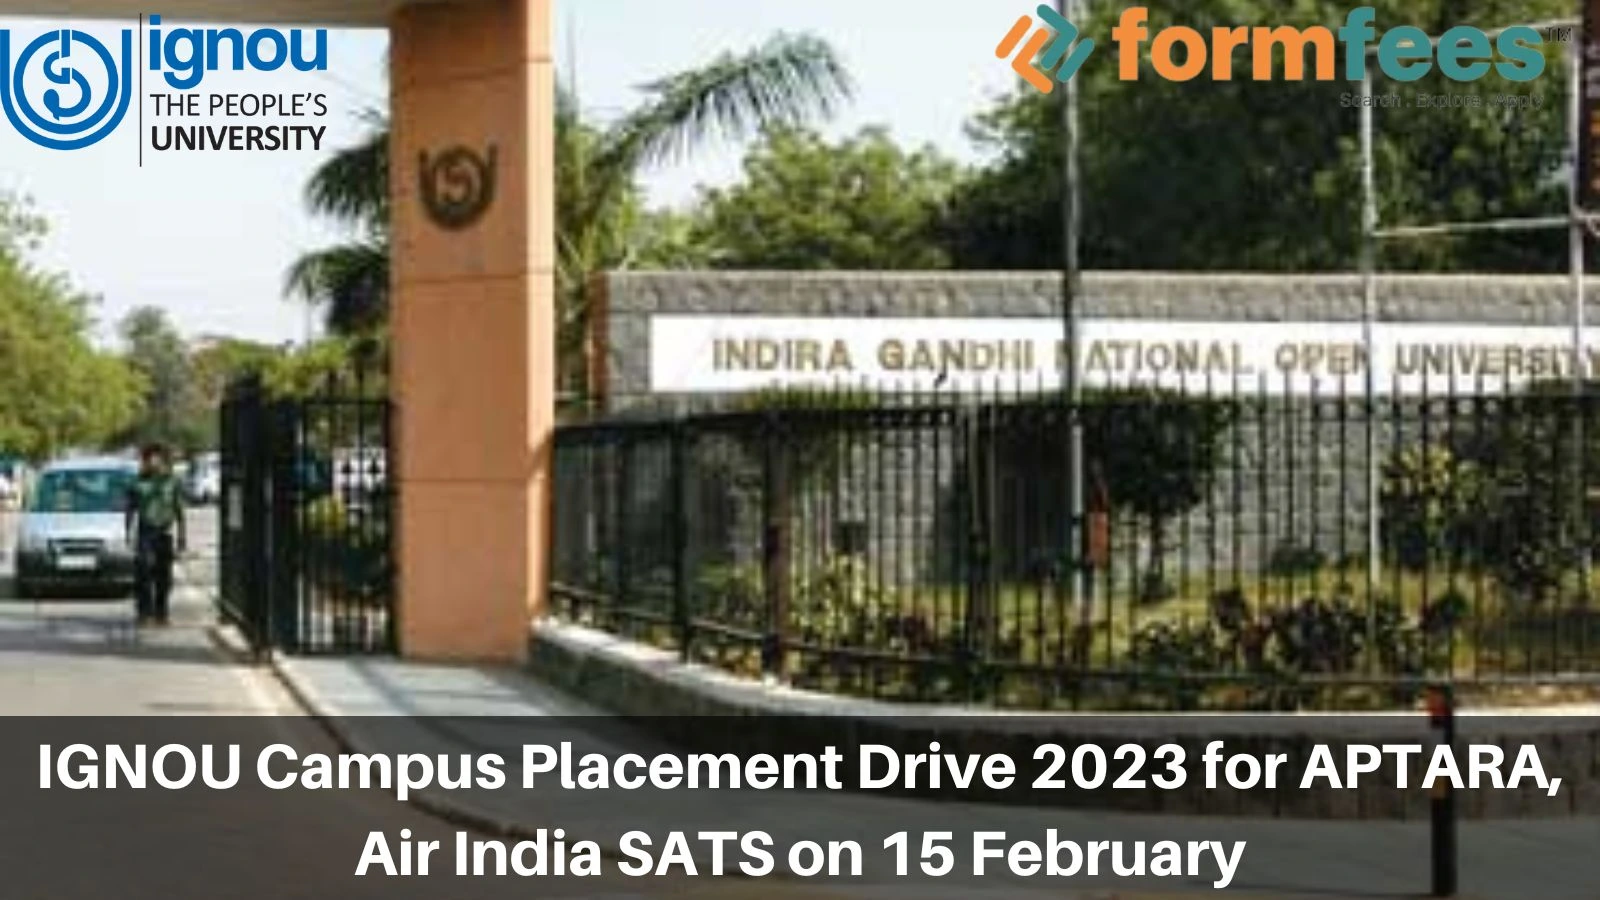 IGNOU Campus Placement Drive 2023 for APTARA, Air India SATS on 15 February